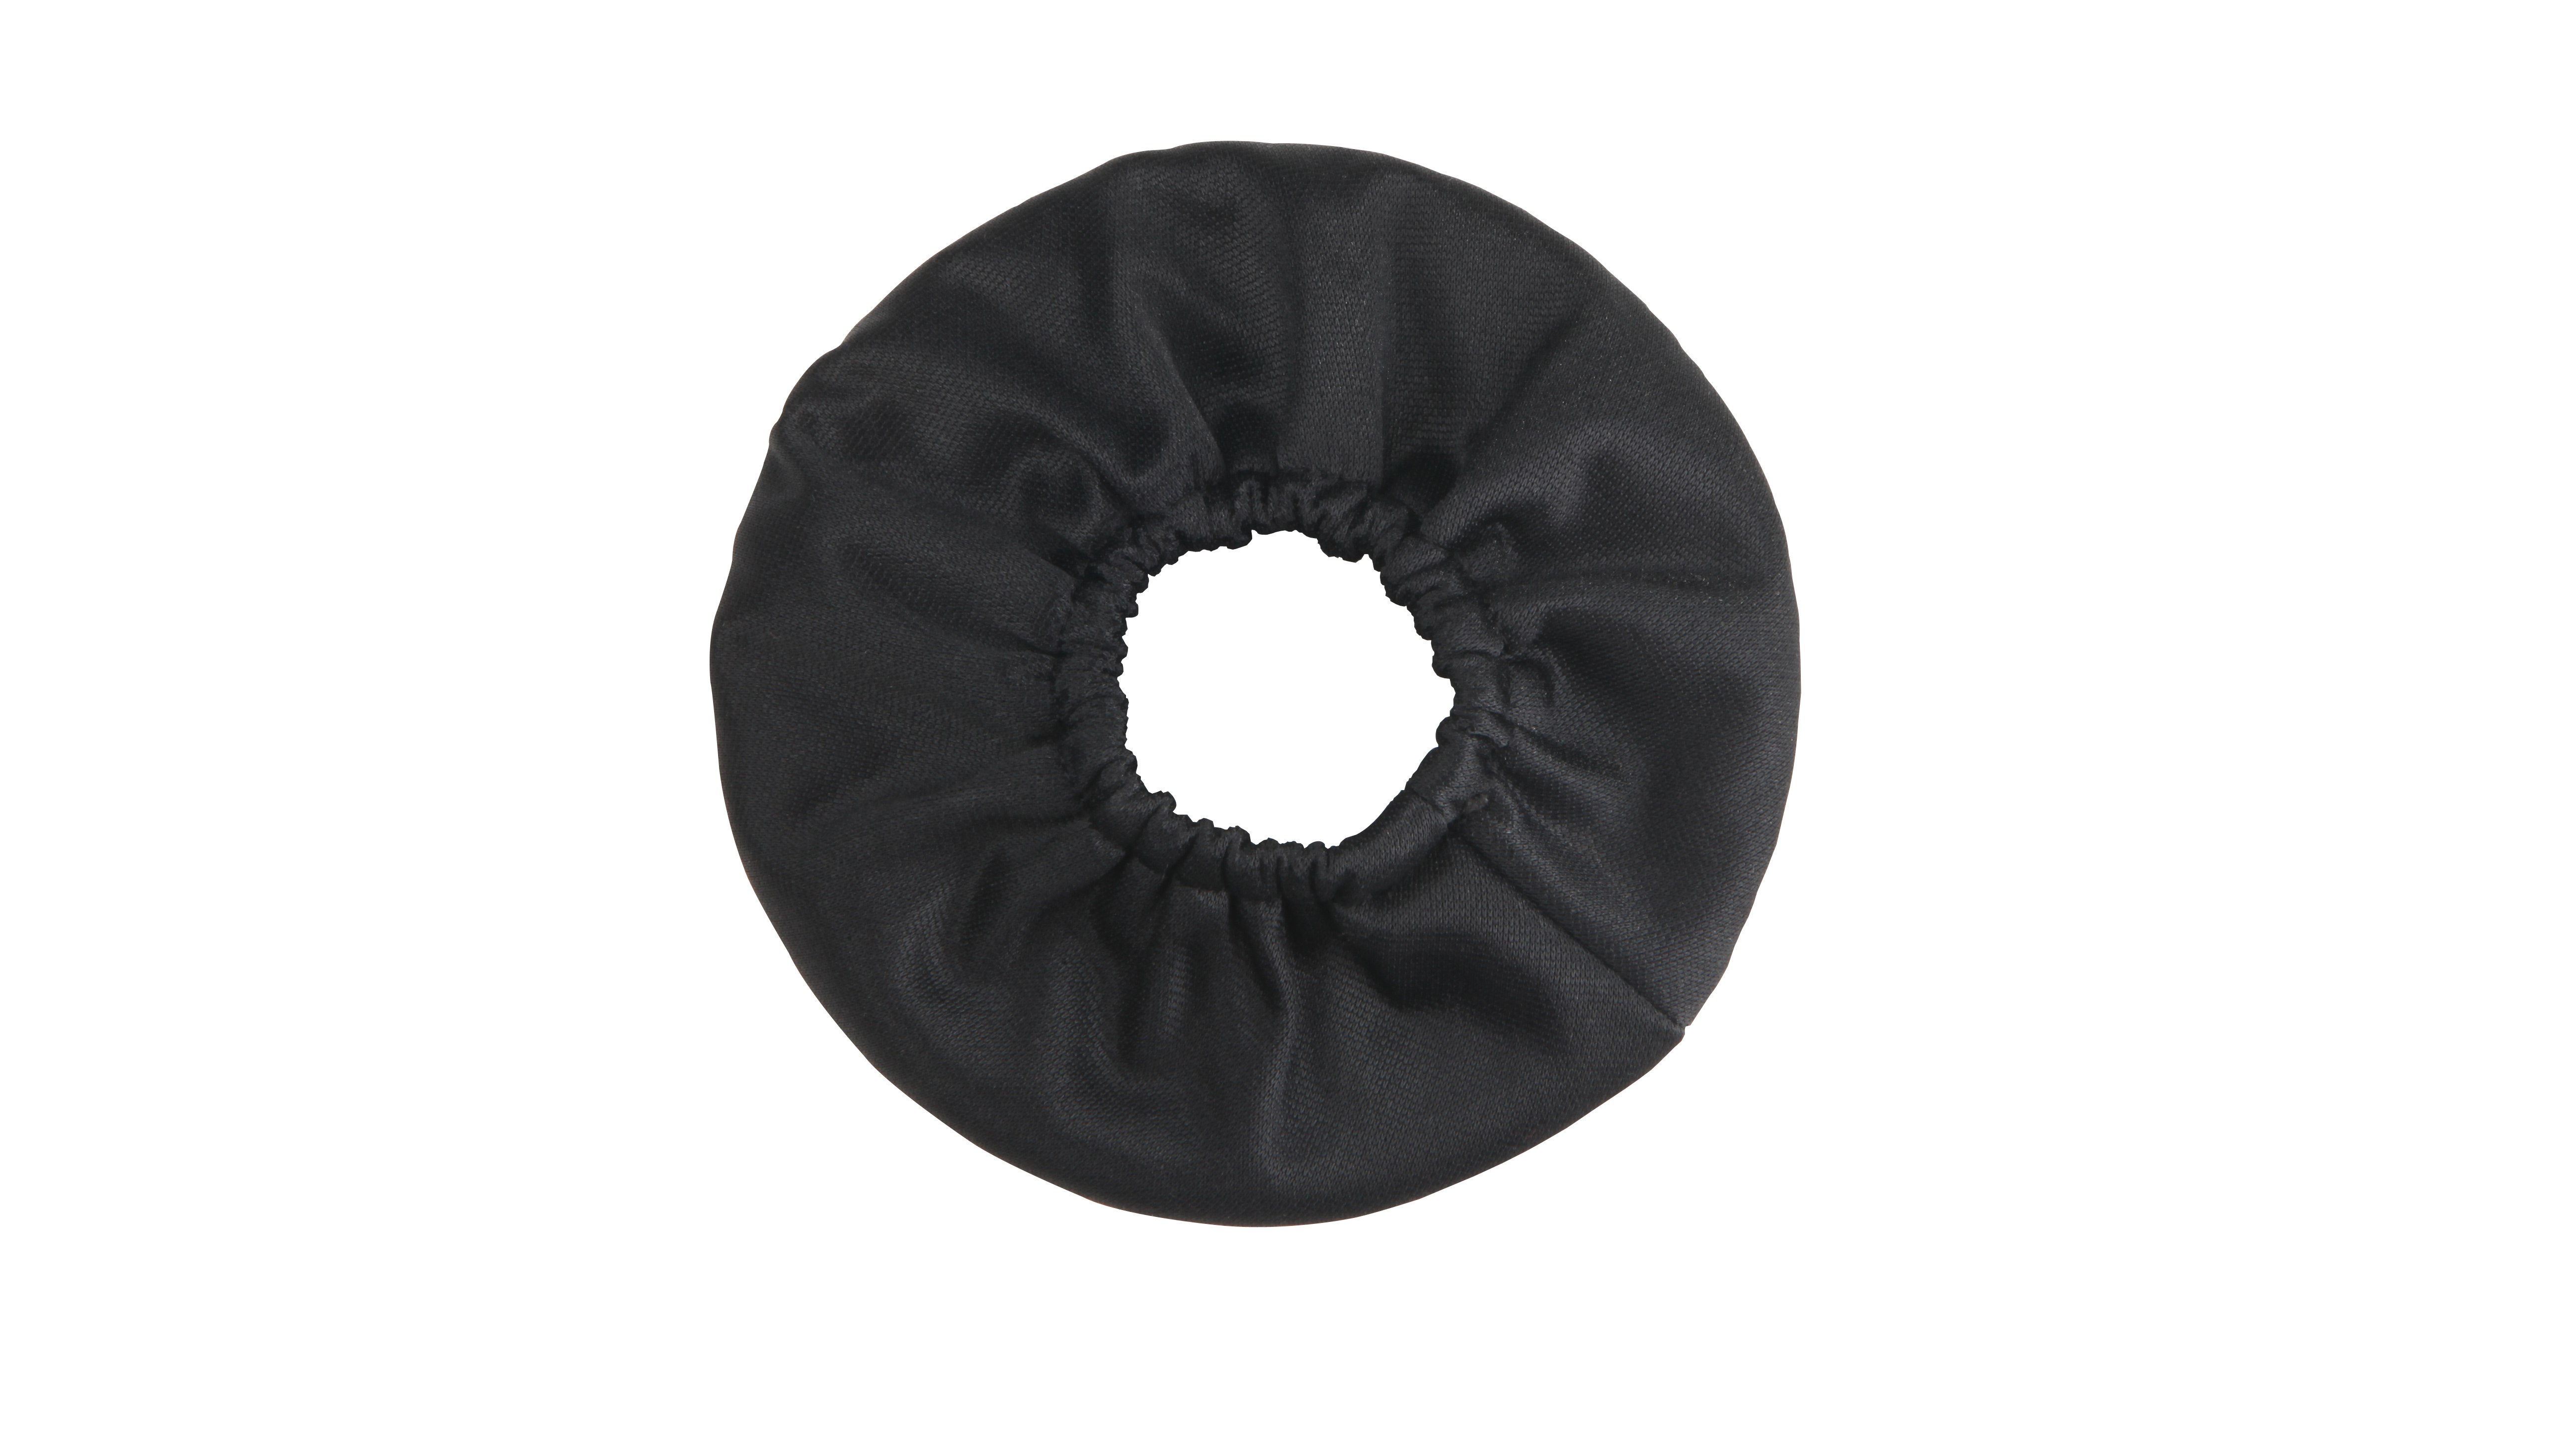 Fabric Lens Donut for MB-T05 & MB-T03 Matte Boxes